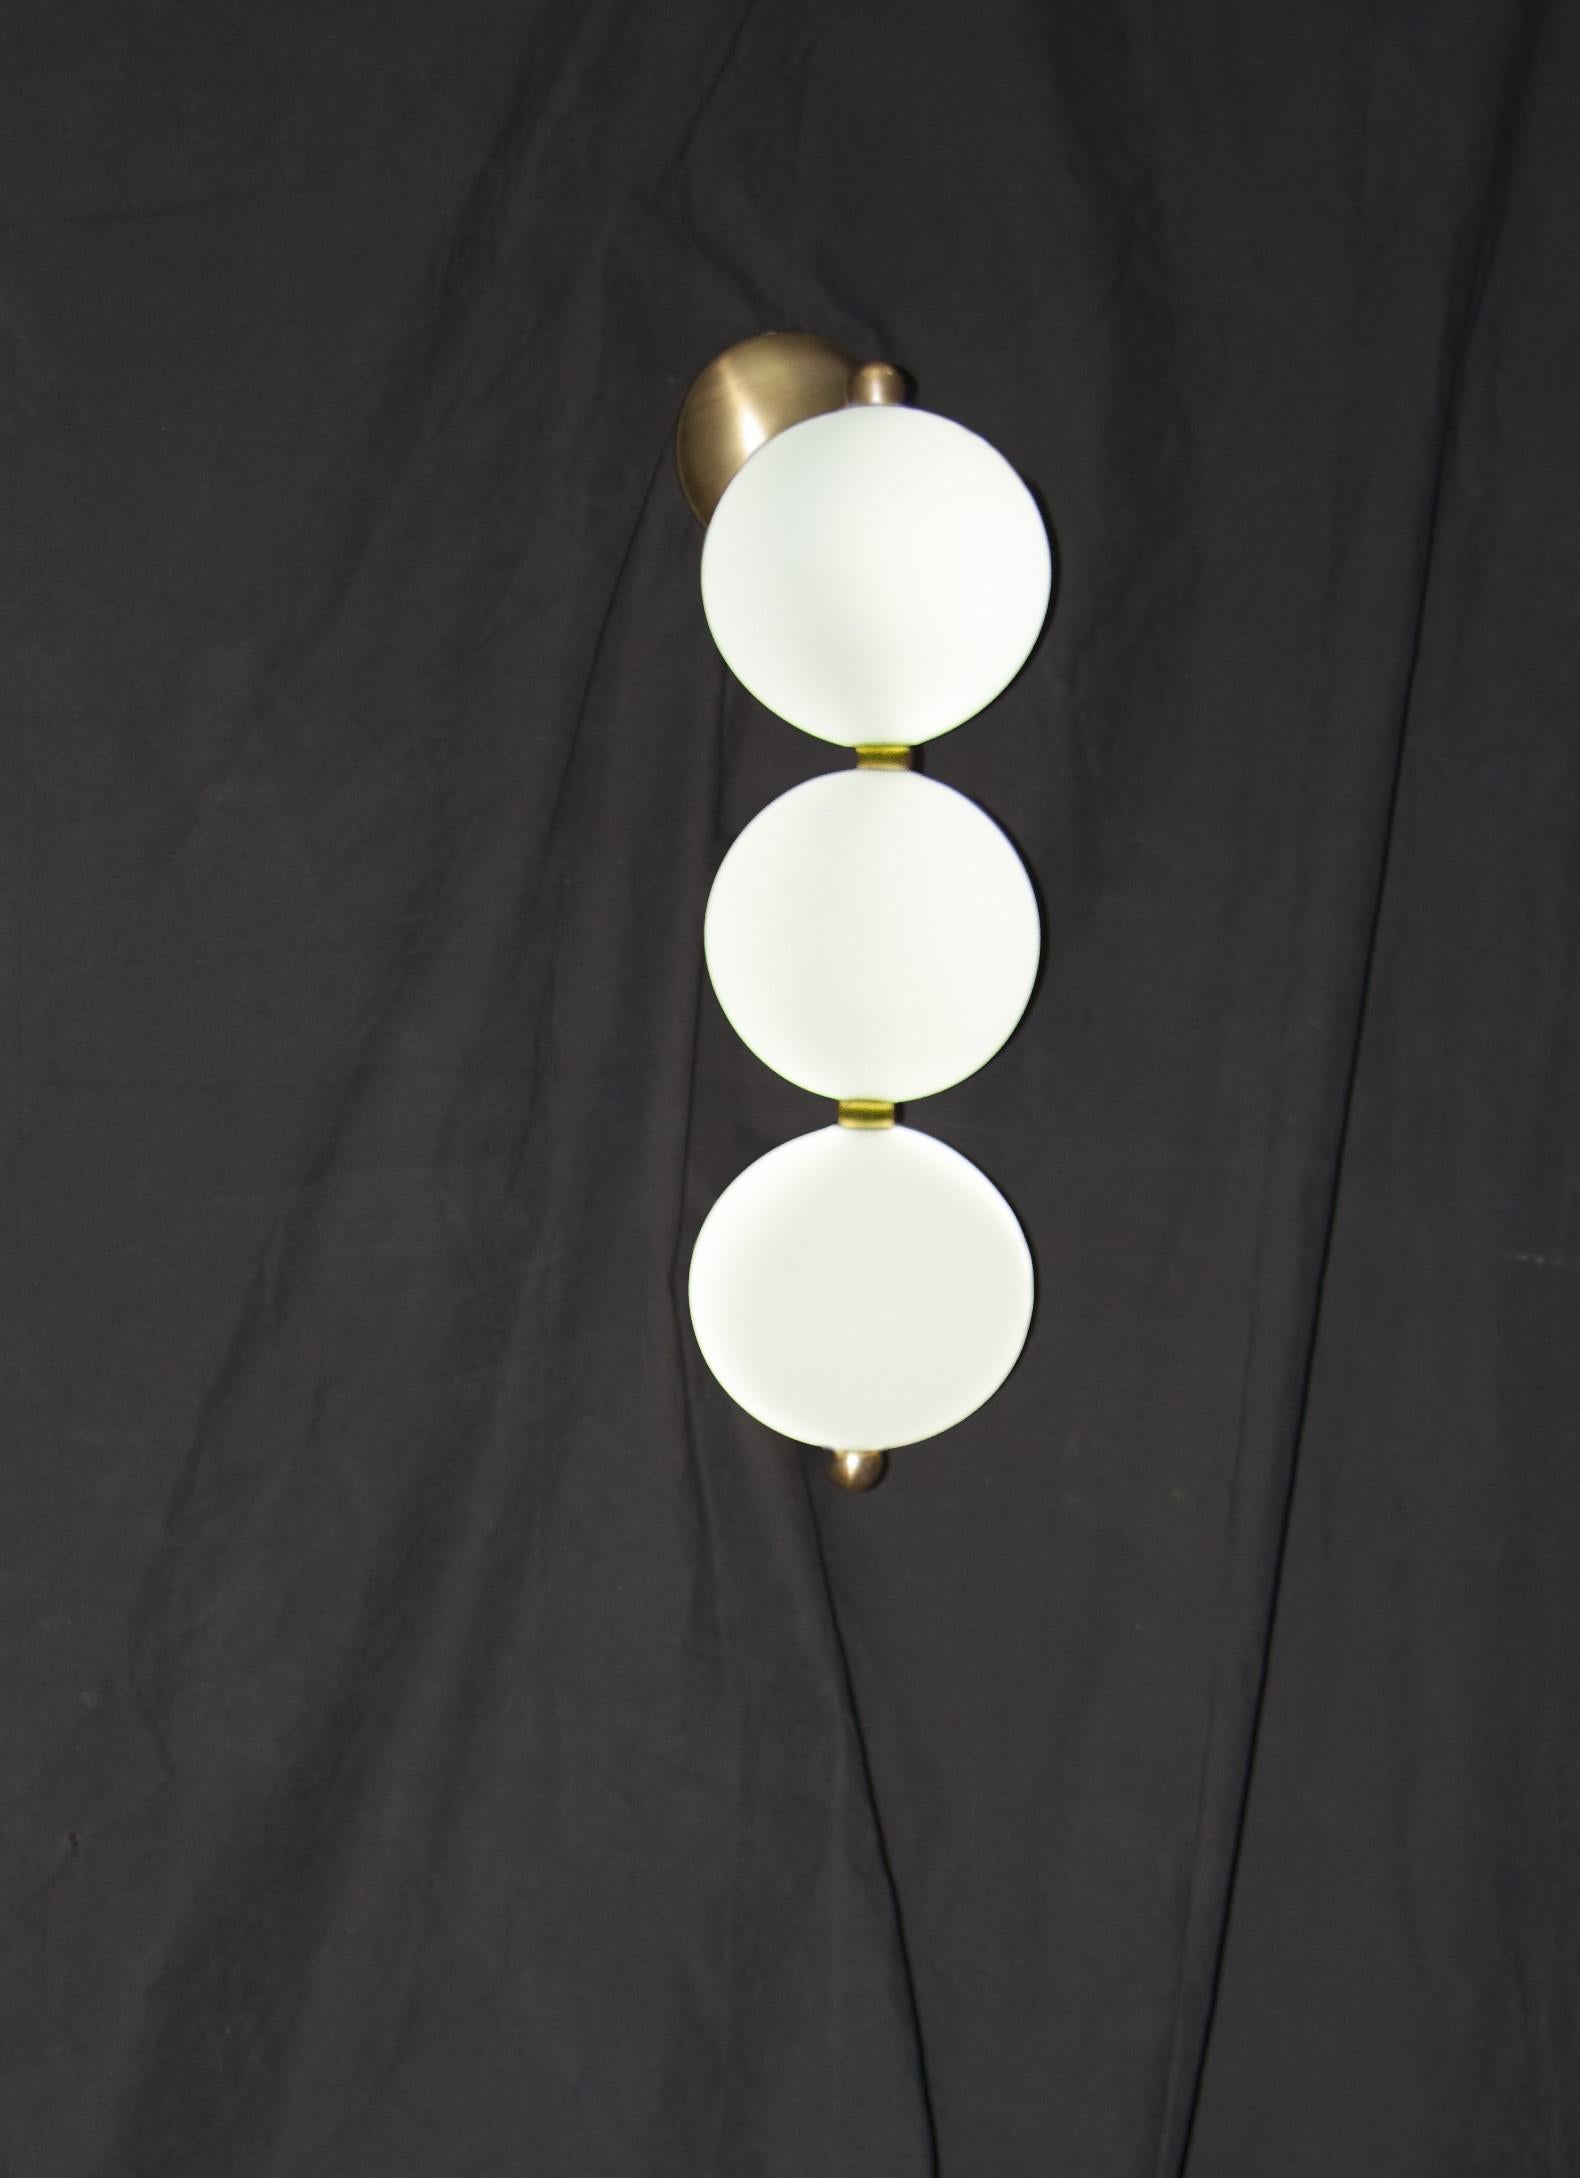 Perle Collier and Courbes wall light by Ludovic Clément d'Armont
Every creation of Ludovic Clément d’Armont can be made to order in any requested dimensions. Please contact us for custom made creations.
Materials: Blown glass, brass,